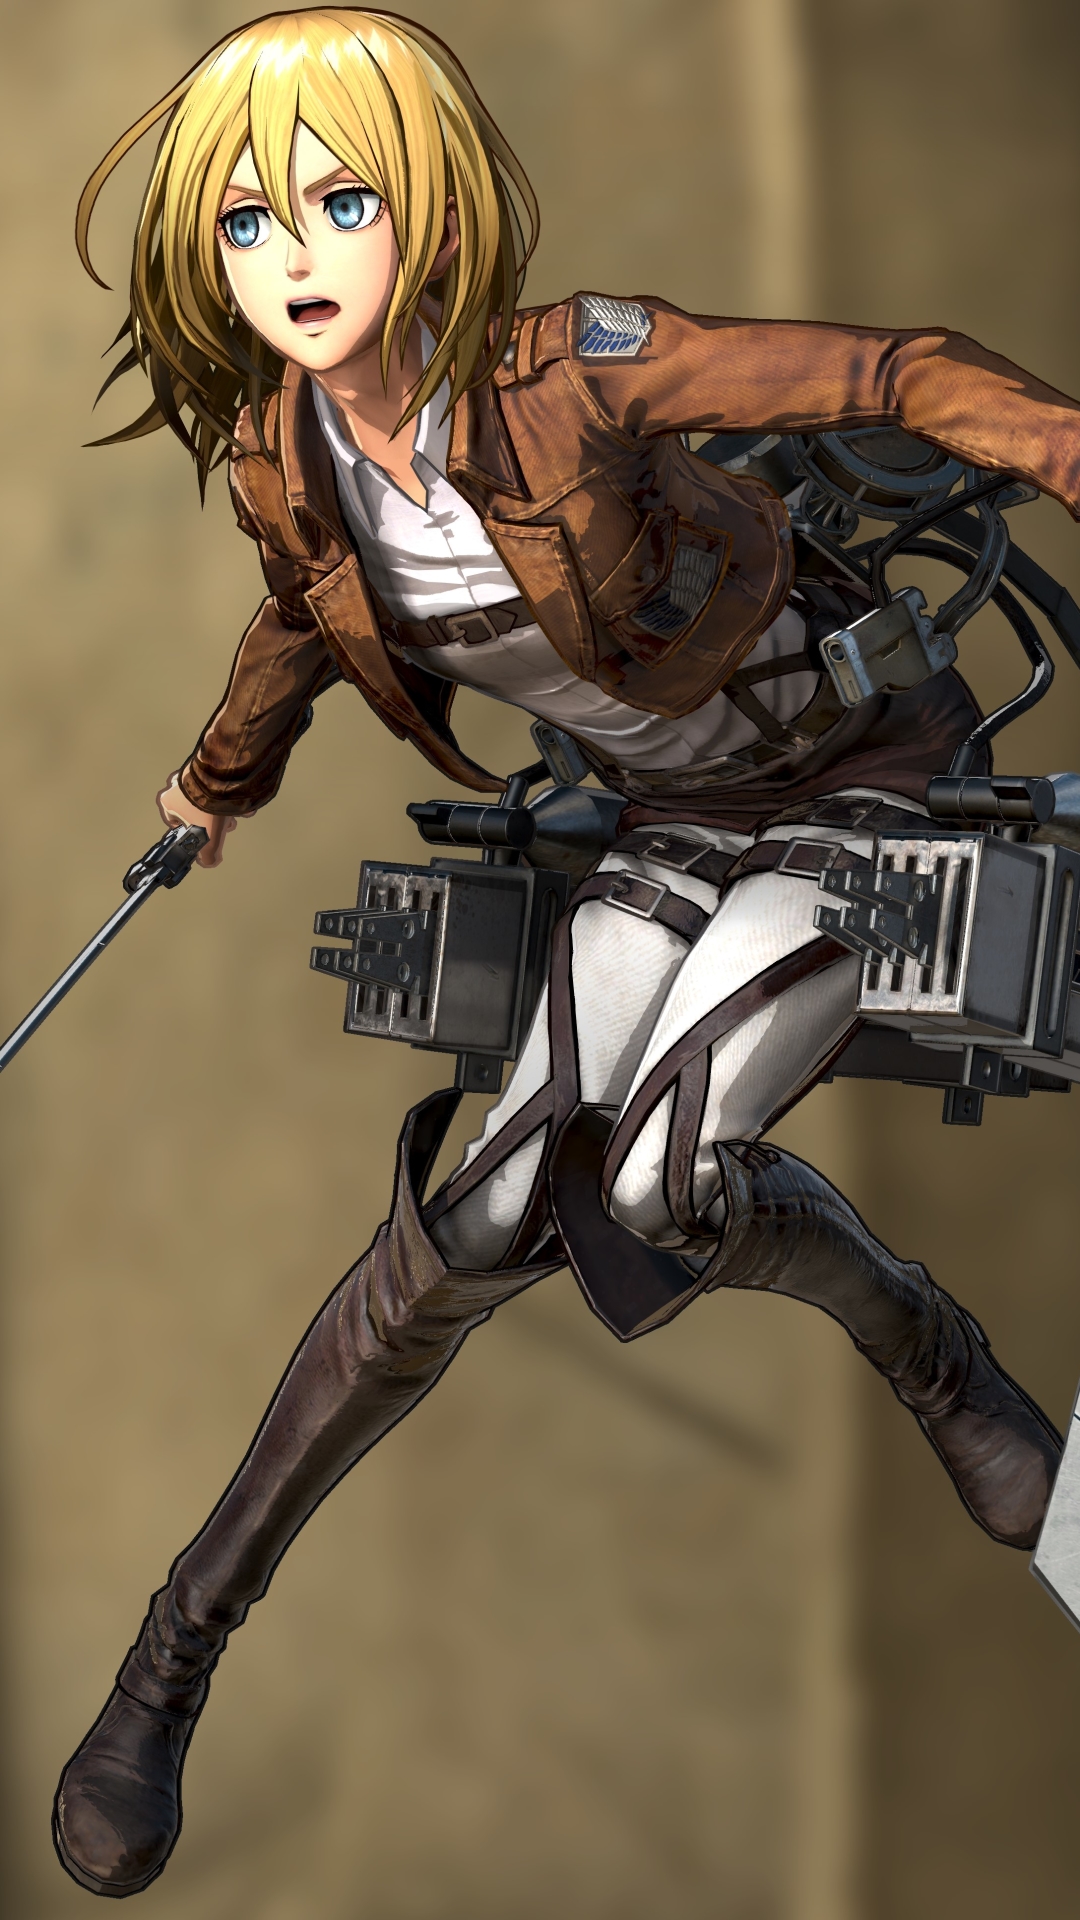 Anime Attack On Titan   Mobile Abyss